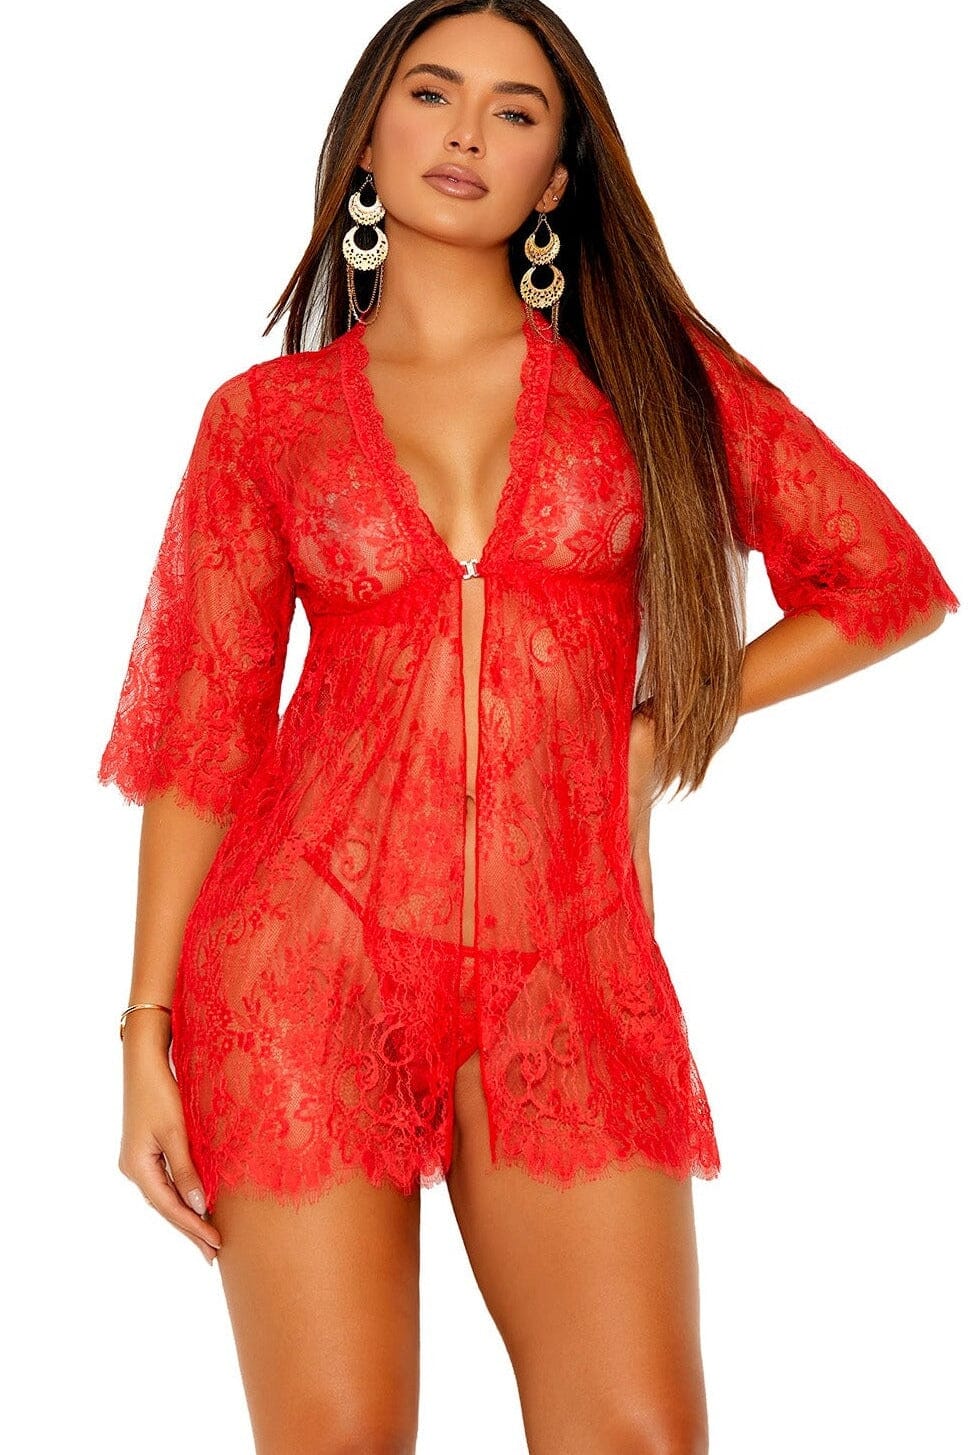 Eyelash Lace Babydoll With Front Clip Closure-Babydolls-Elegant Moments-Red-S-SEXYSHOES.COM